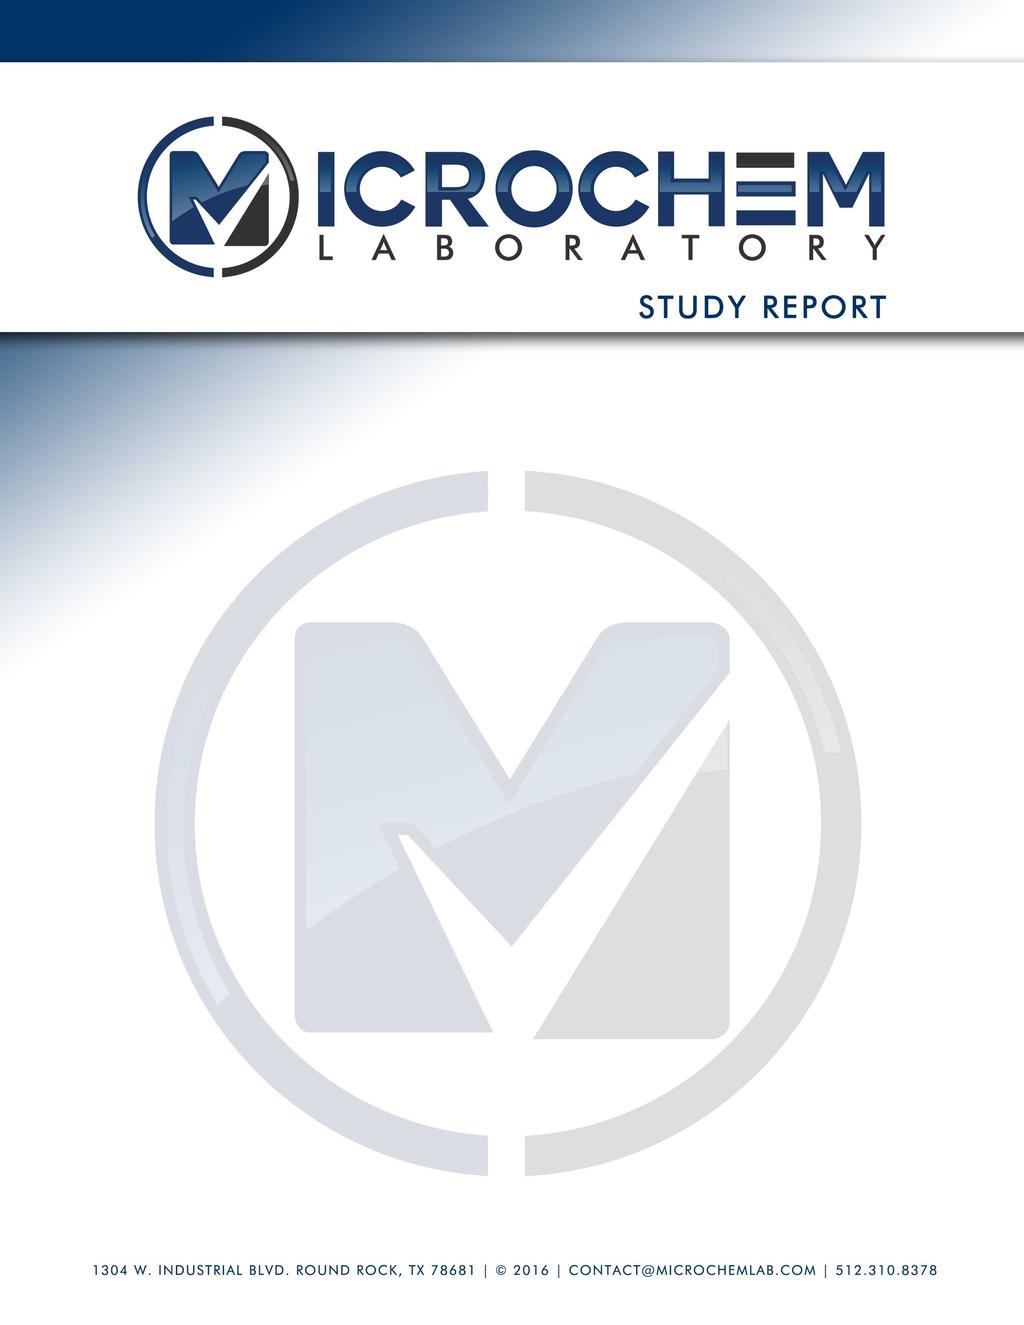 Study Title Antibacterial Activity and Efficacy of KHG FiteBac Technology Test Substance Using a Suspension Time-Kill Procedure Test Method ASTM International Method E2315 Assessment of Antimicrobial